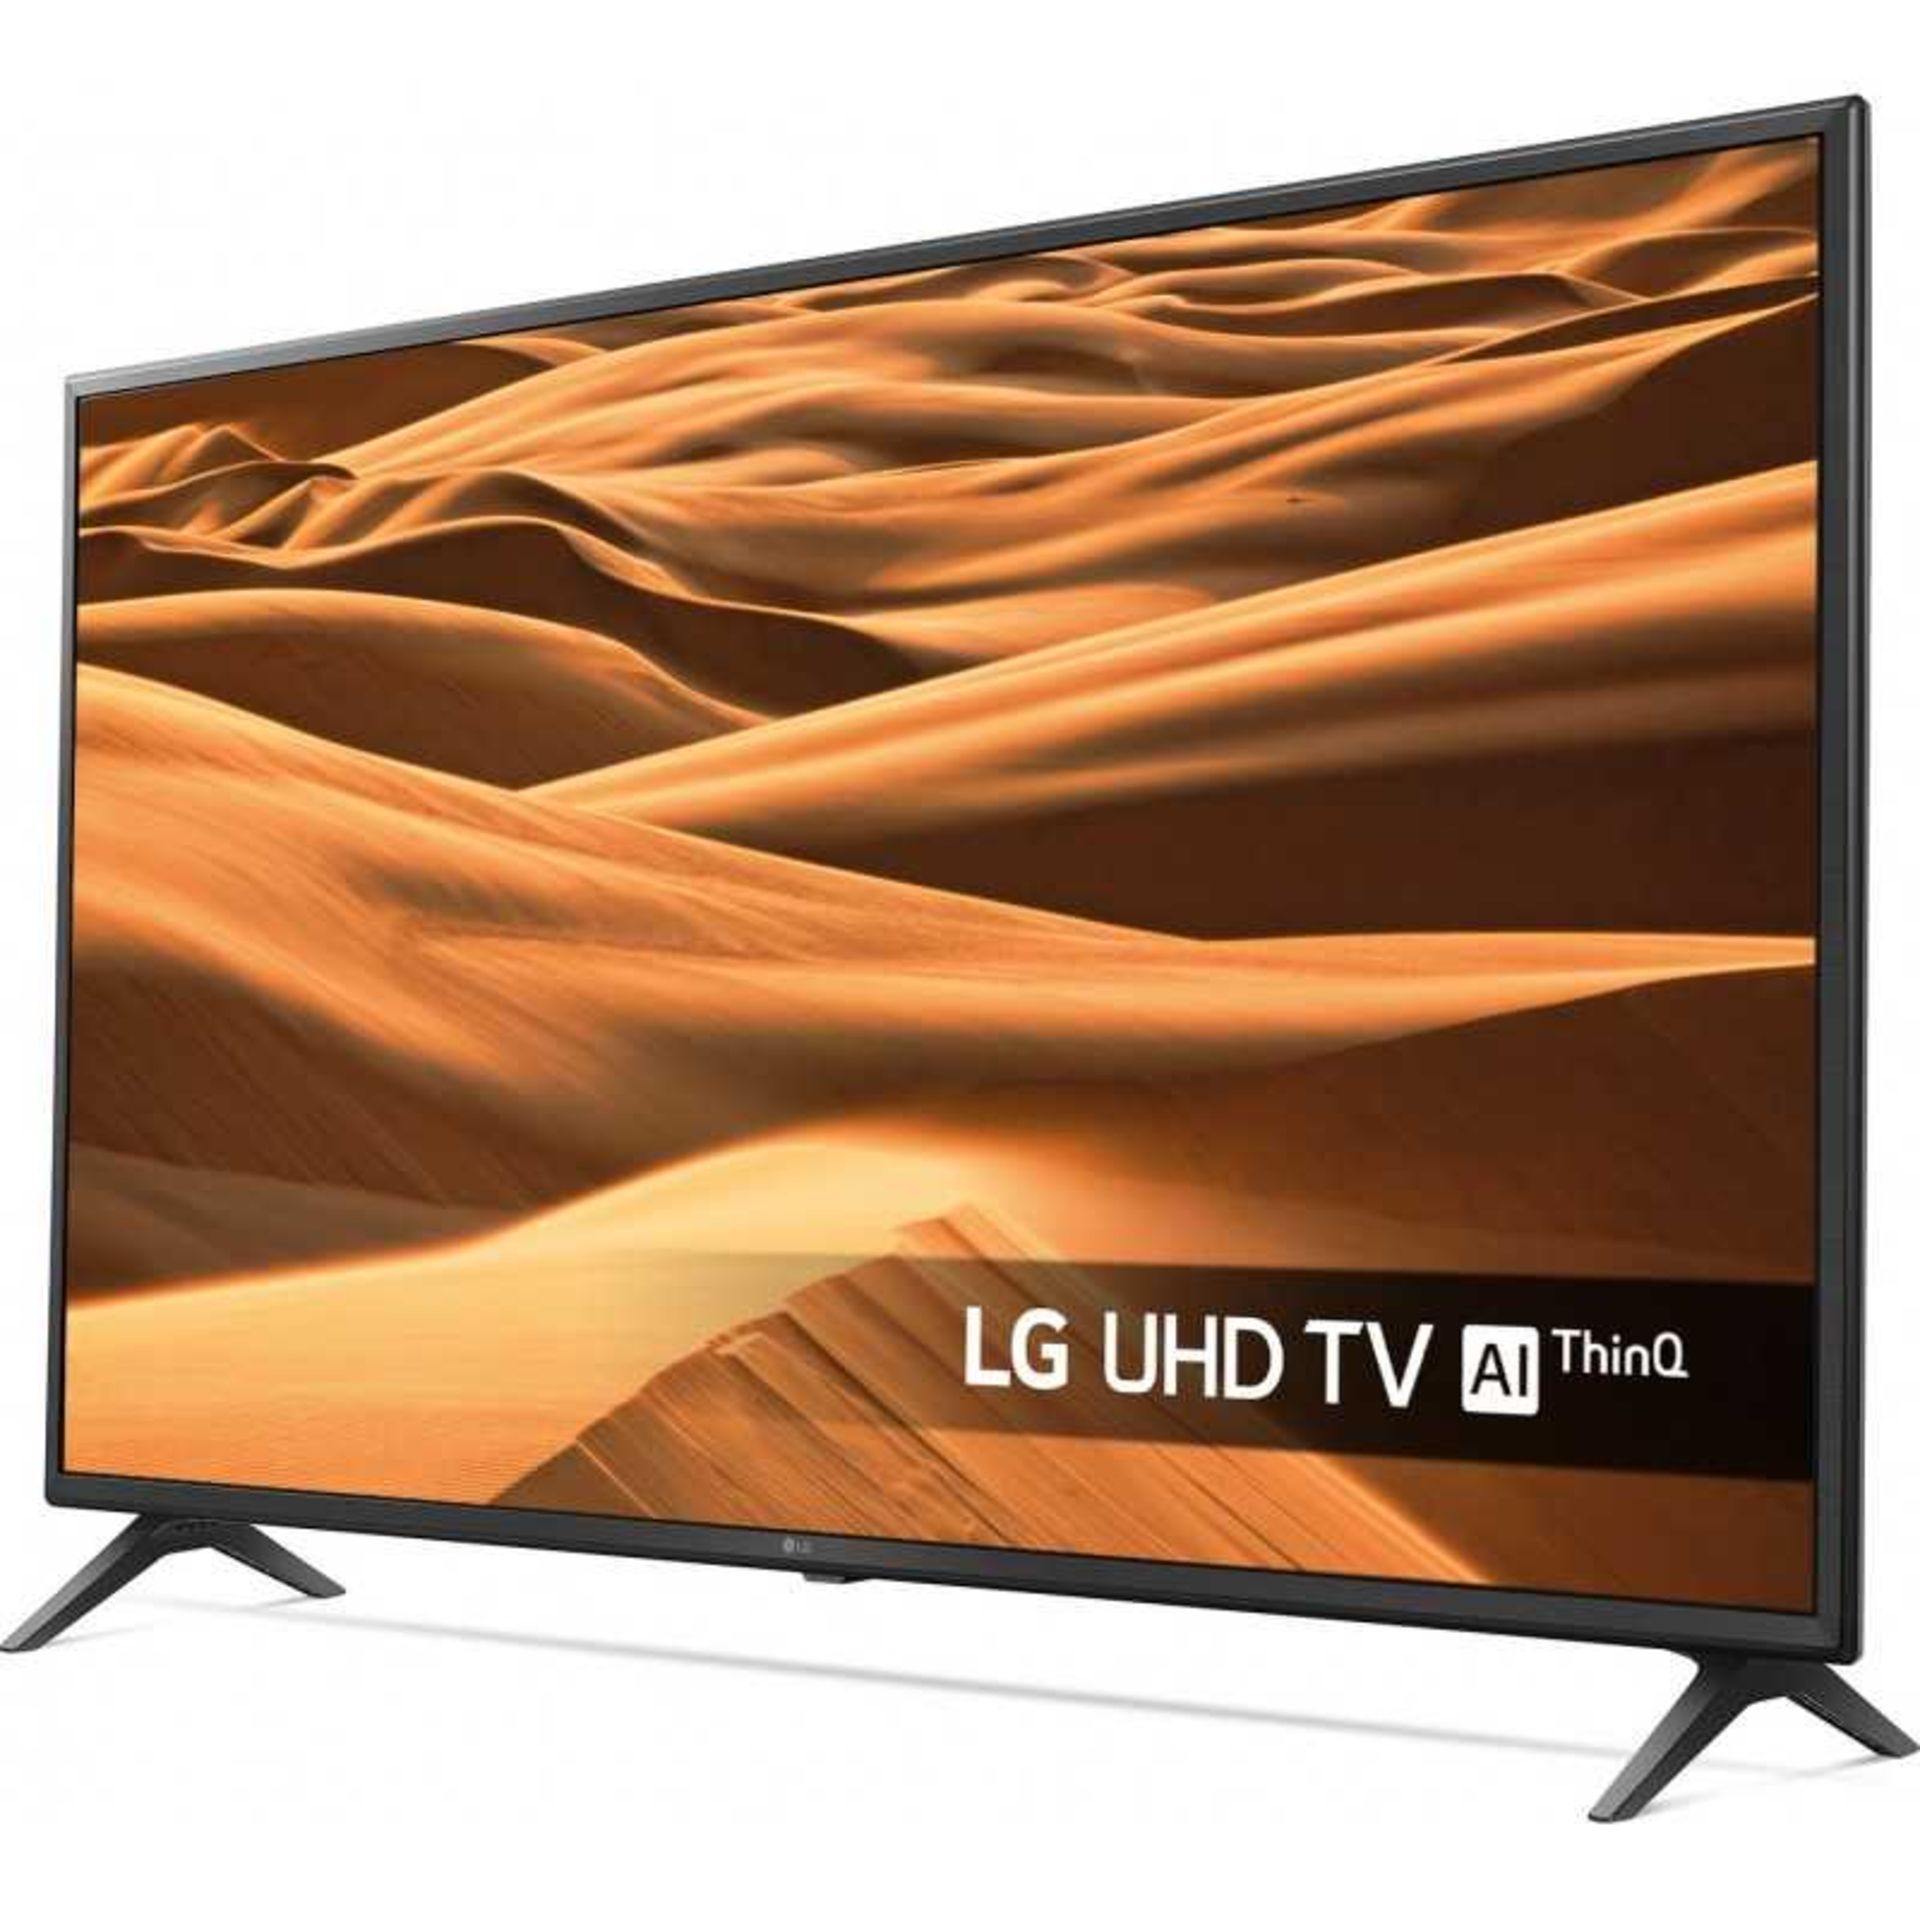 V Grade A LG 70 Inch ACTIVE HDR 4K ULTRA HD LED SMART TV WITH FREEVIEW HD & WEBOS & WIFI - AI TV